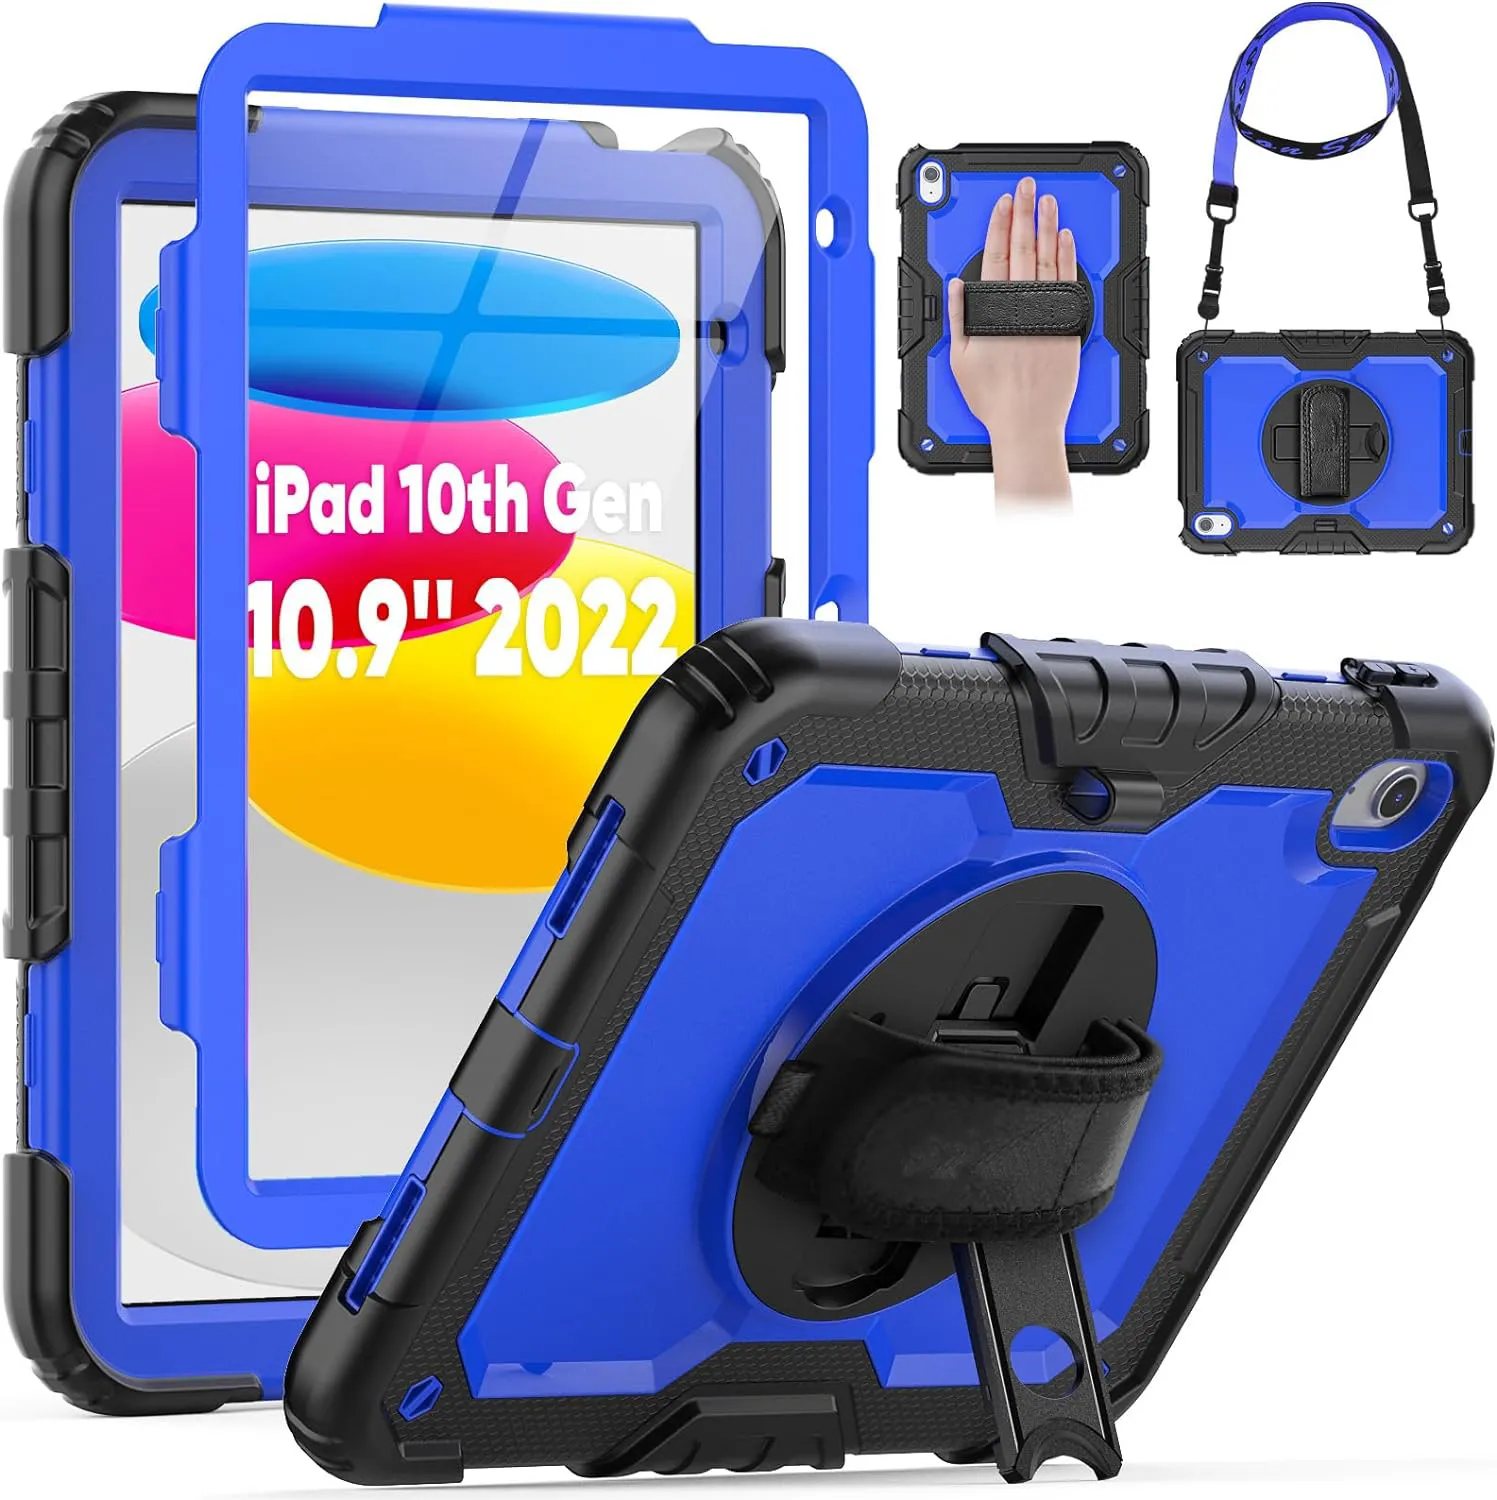 With PET Screen Protector Hybrid Shockproof Rugged Tough Impact Armor Silicone Stand Hand Grip Cases Shoulder Strap For iPad Mini 5 6 10th 10.9 Pro 11 Air 4 10.5 10.2